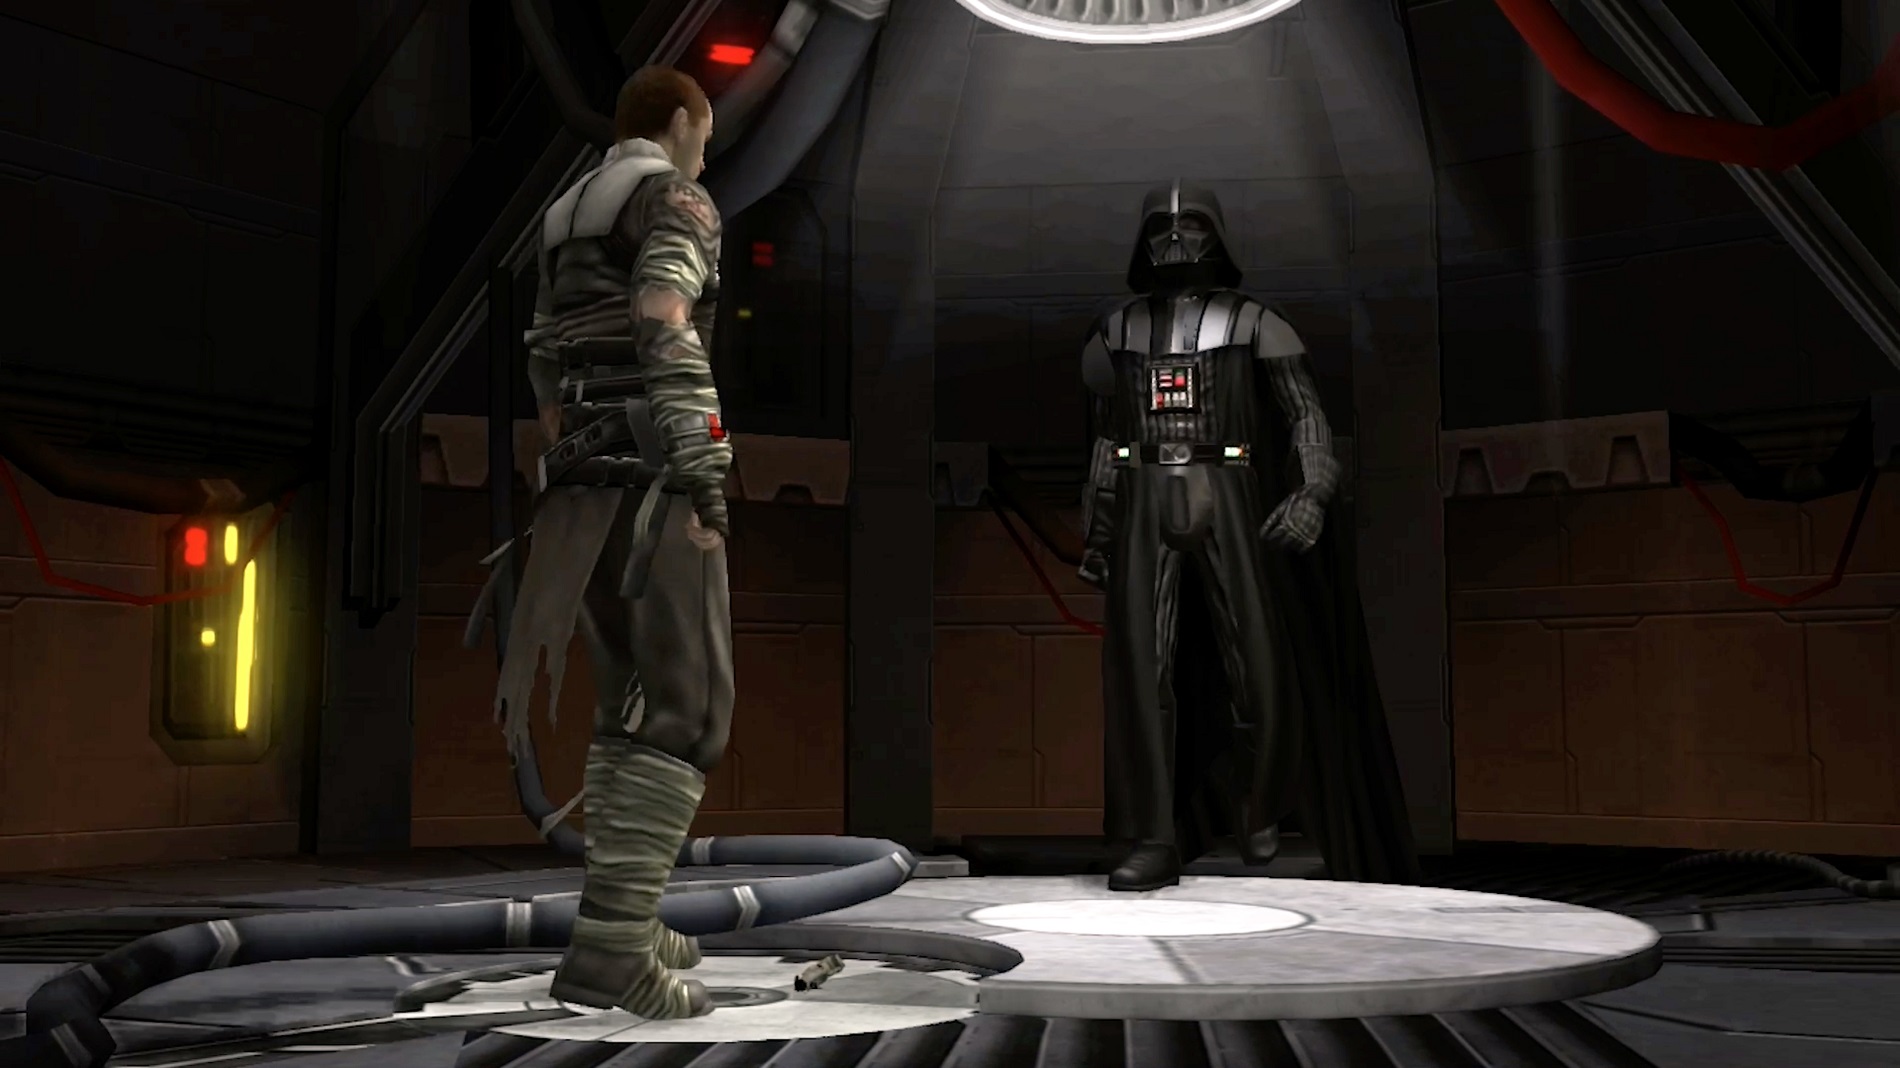 Player and darth icky infront of each other, game screenshot